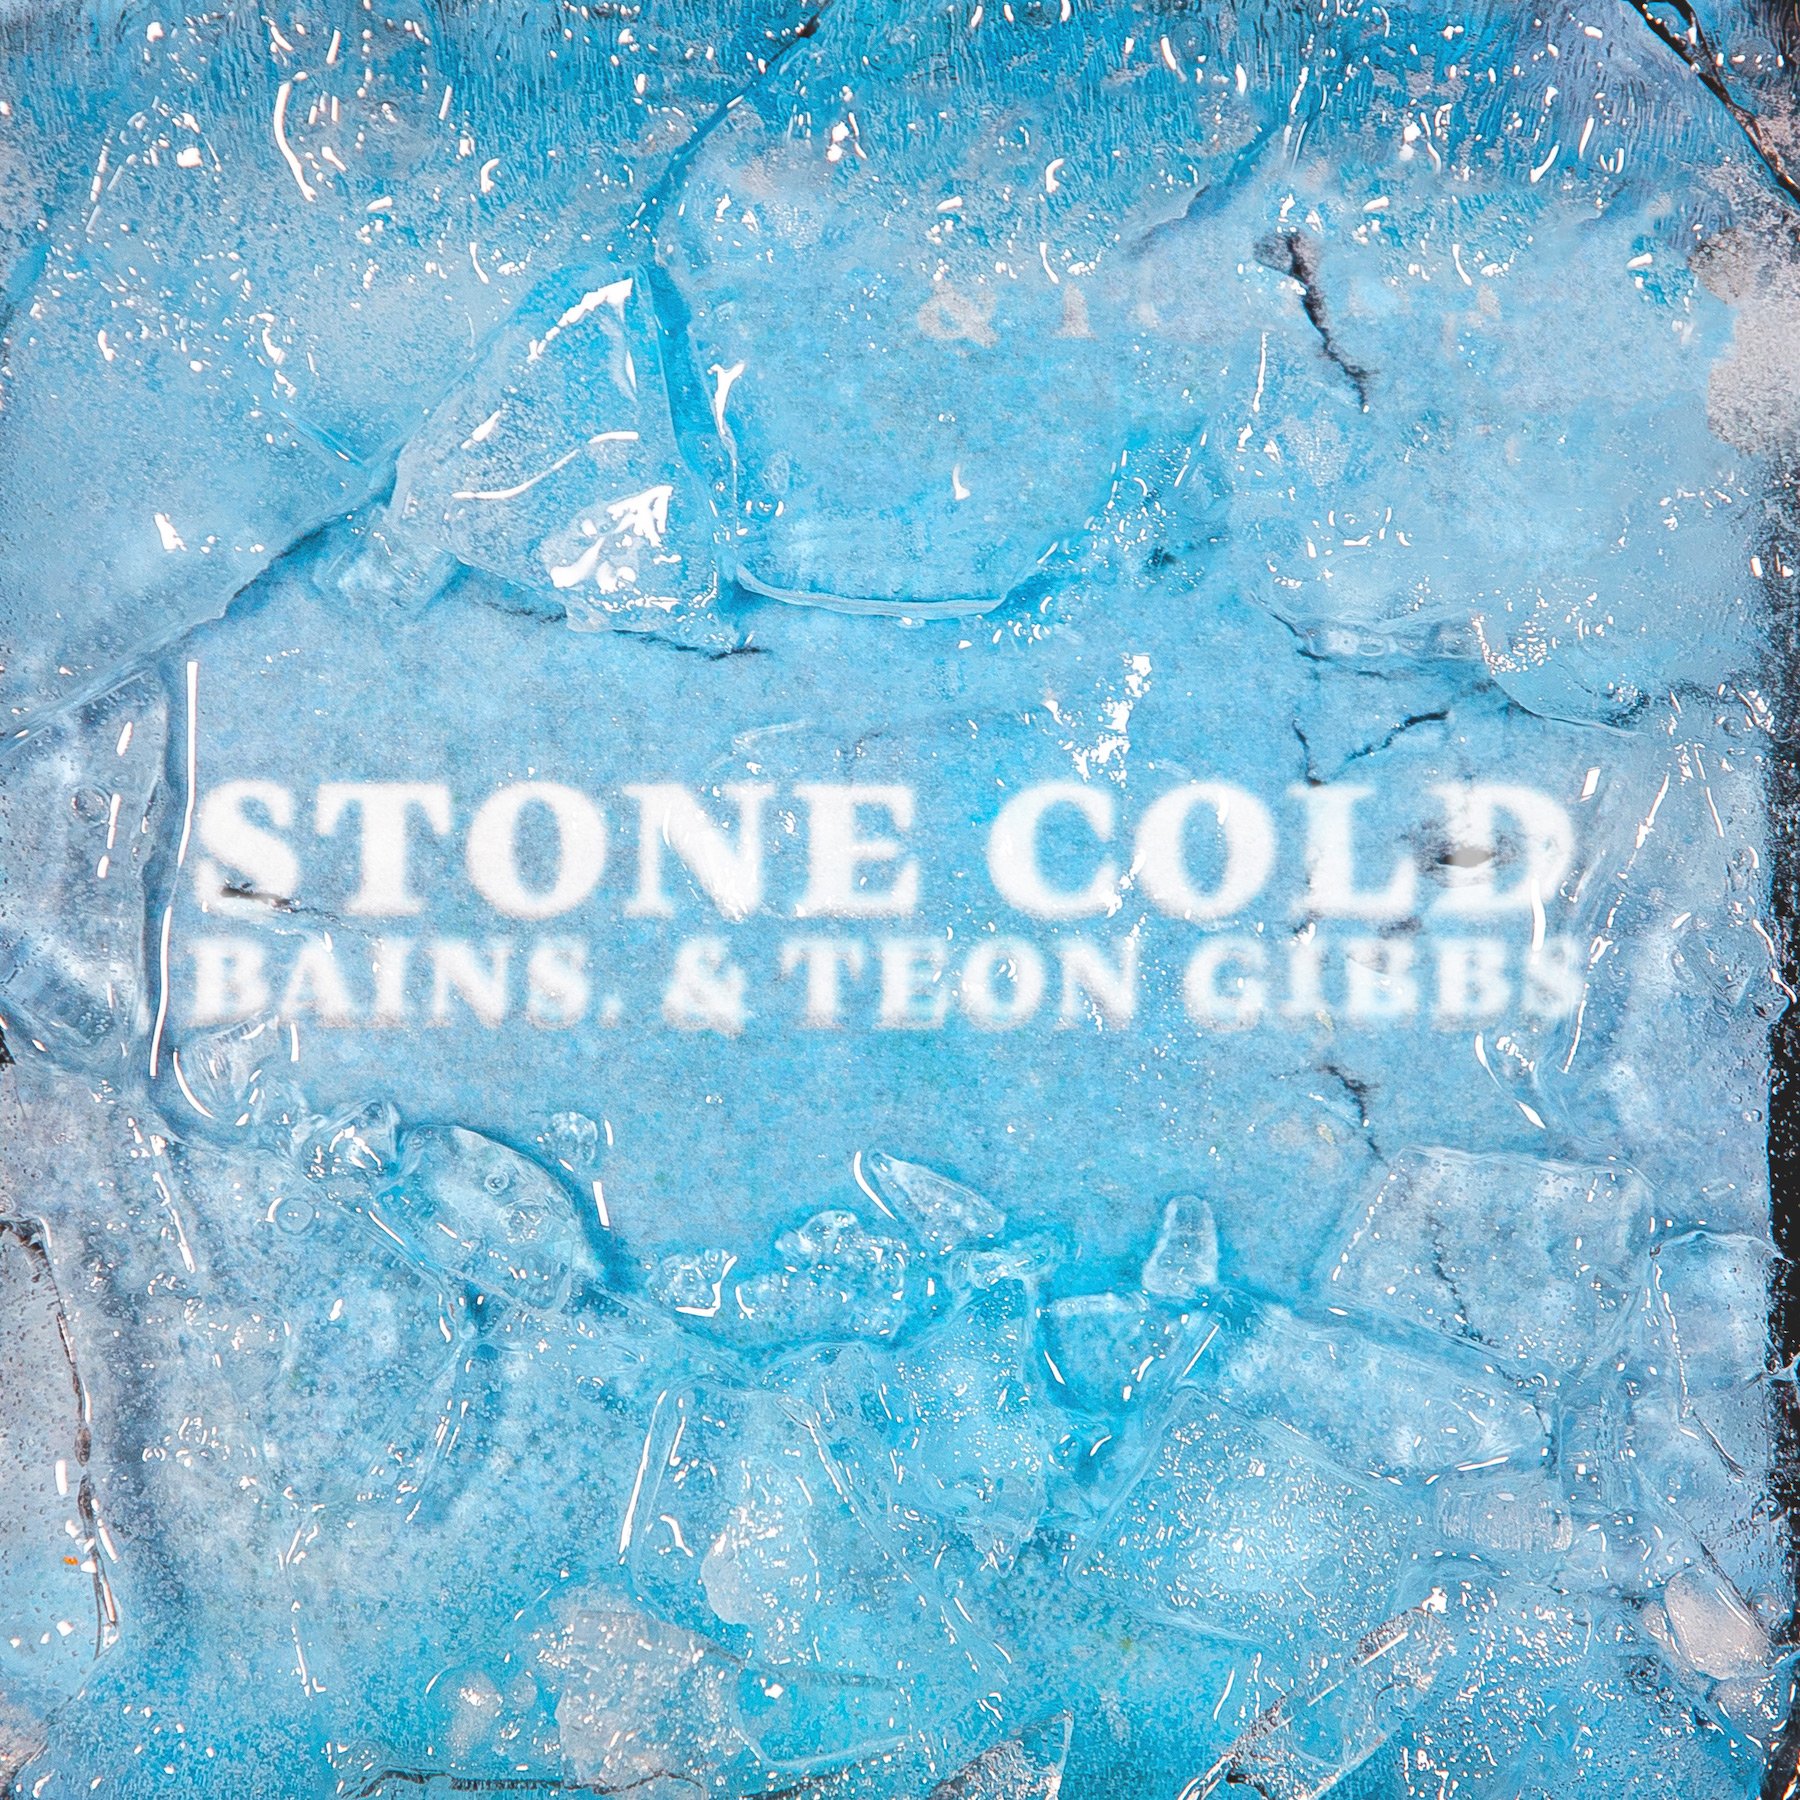 Stone Cold by BAINS. &amp; Teon Gibbs